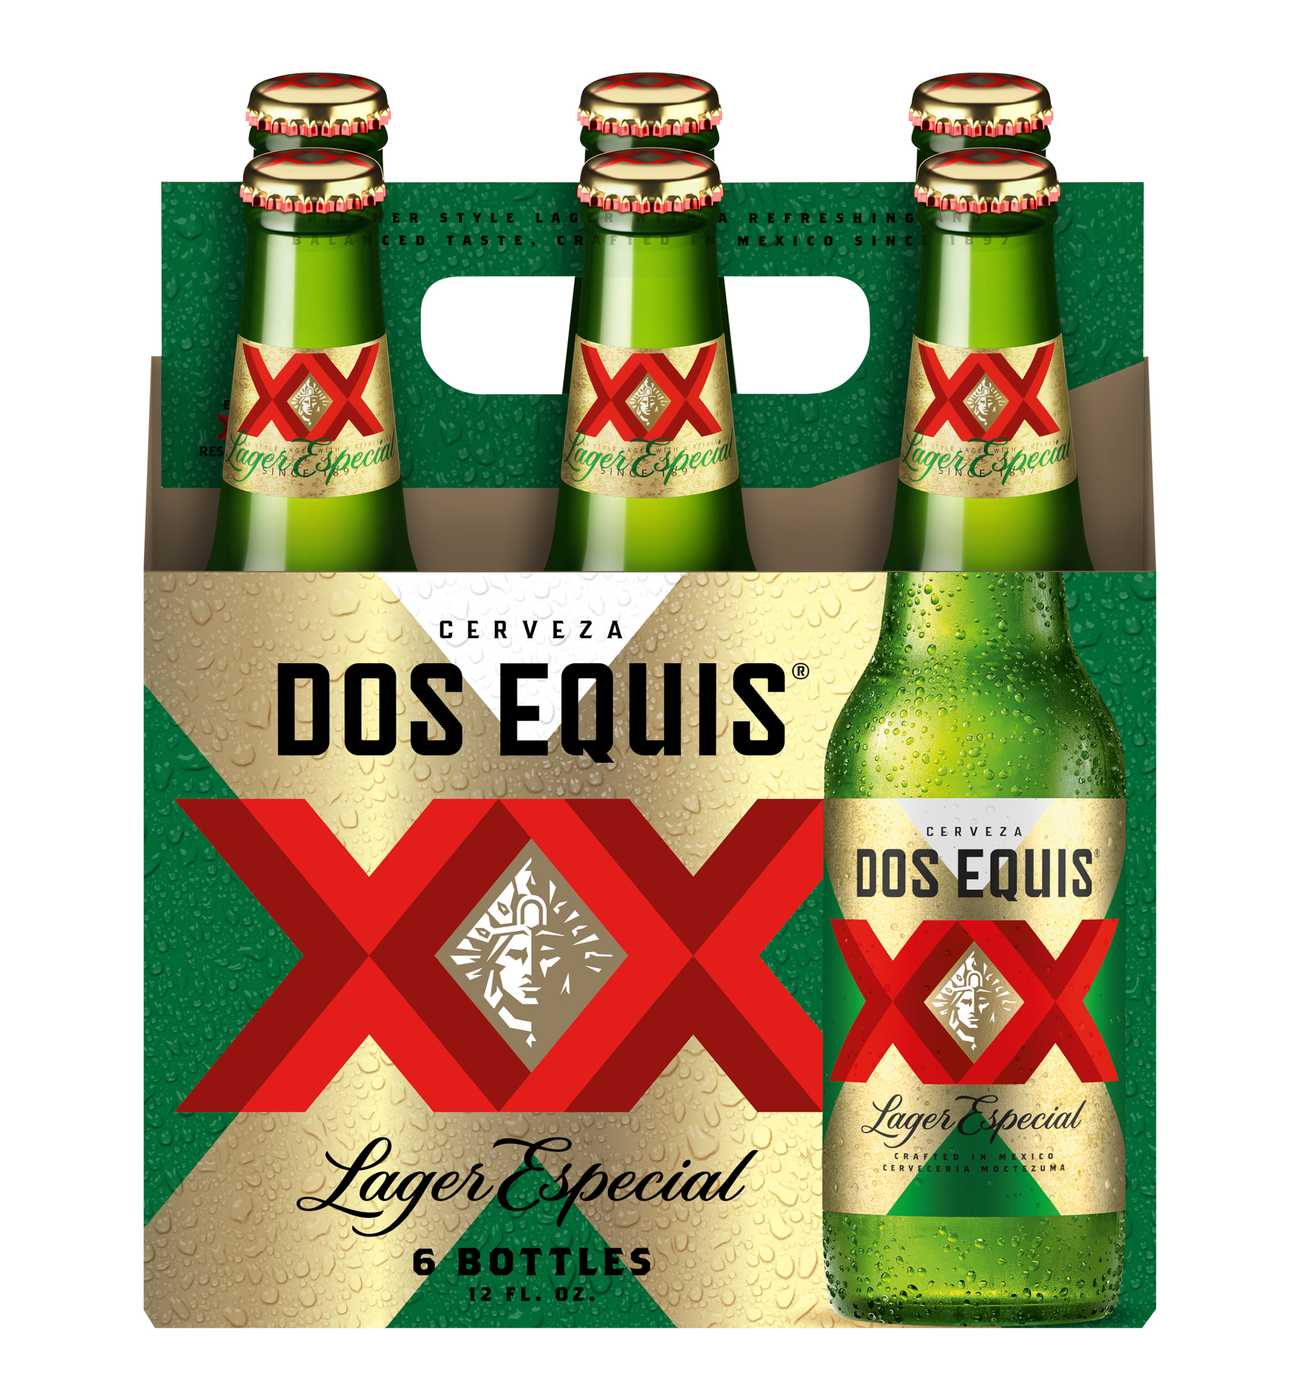 Dos Equis Lager Especial Beer 6 pk Bottles; image 2 of 3